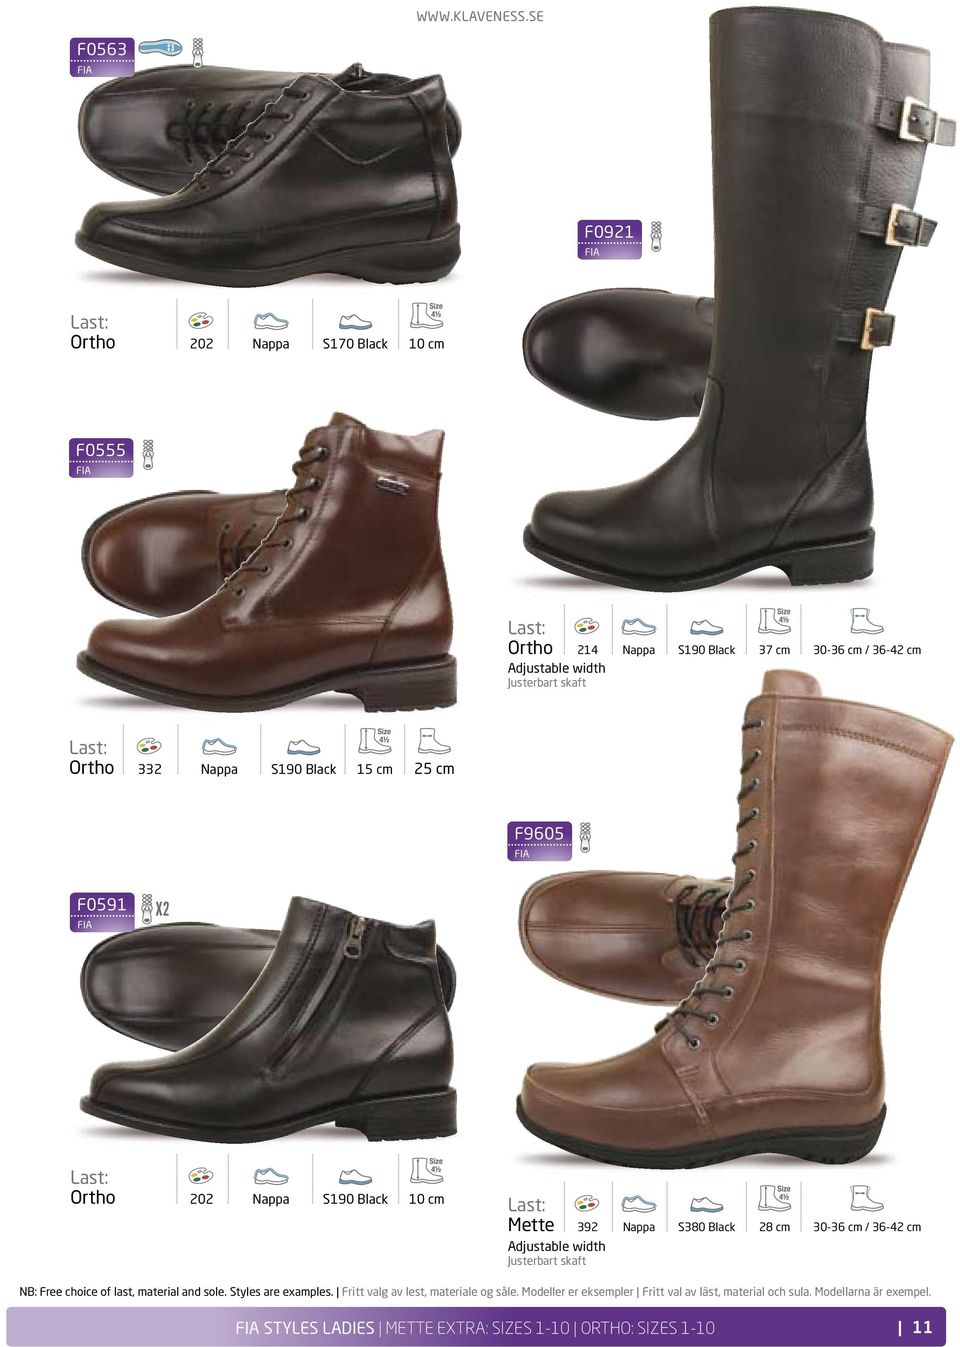 Justerbart skaft NB: Free choice of last, material and sole. Styles are examples. Fritt valg av lest, materiale og såle.